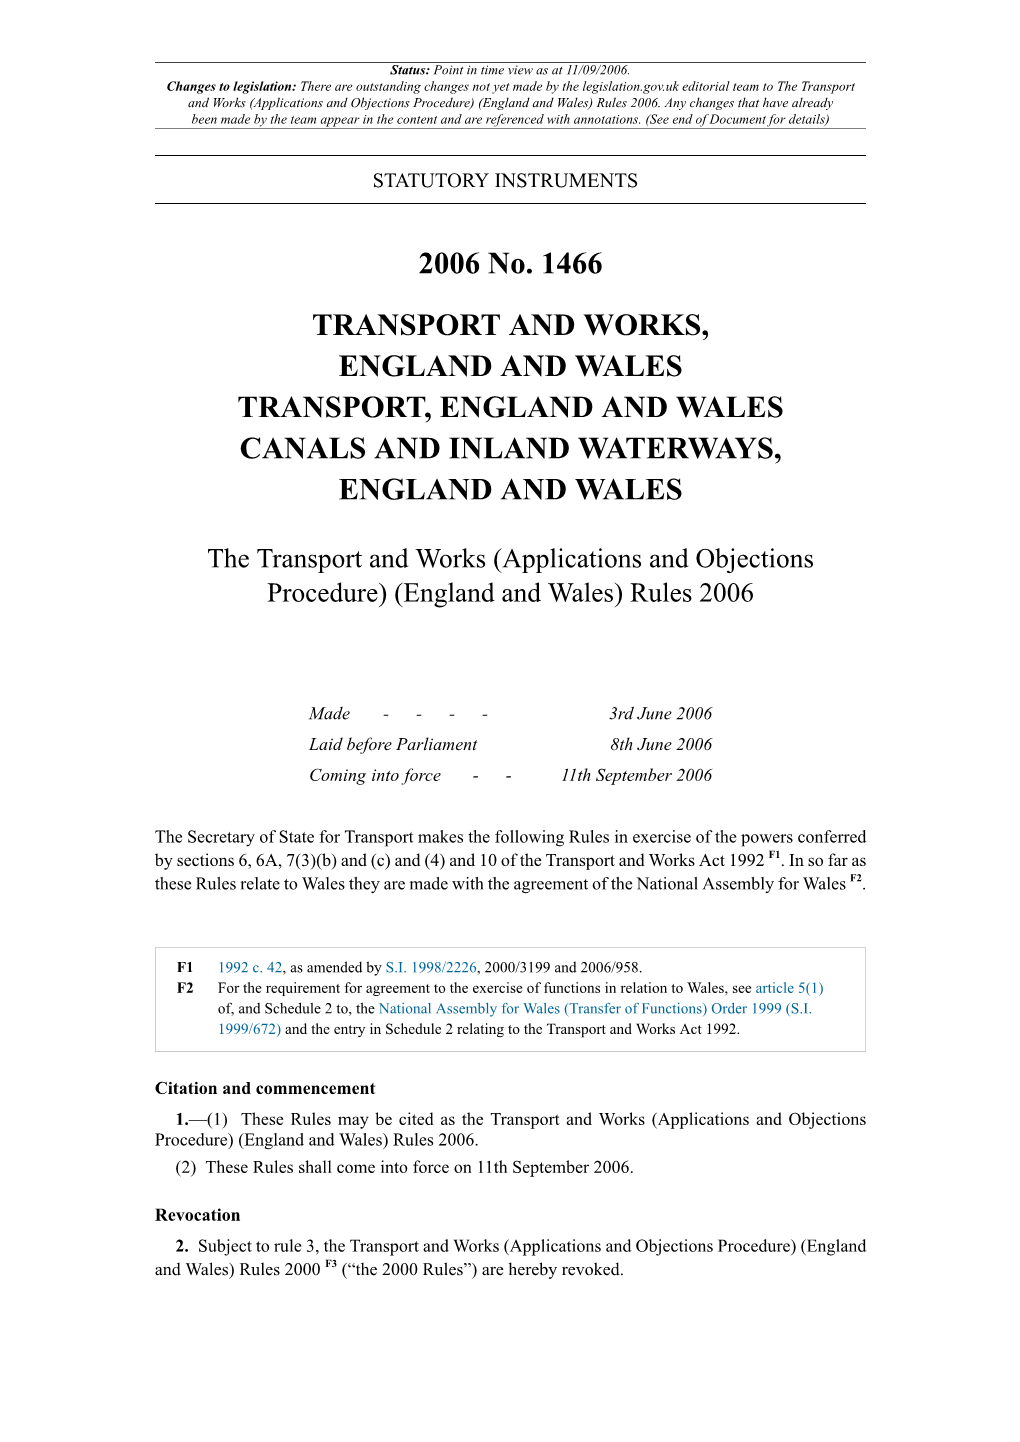 The Transport and Works (Applications and Objections Procedure) (England and Wales) Rules 2006